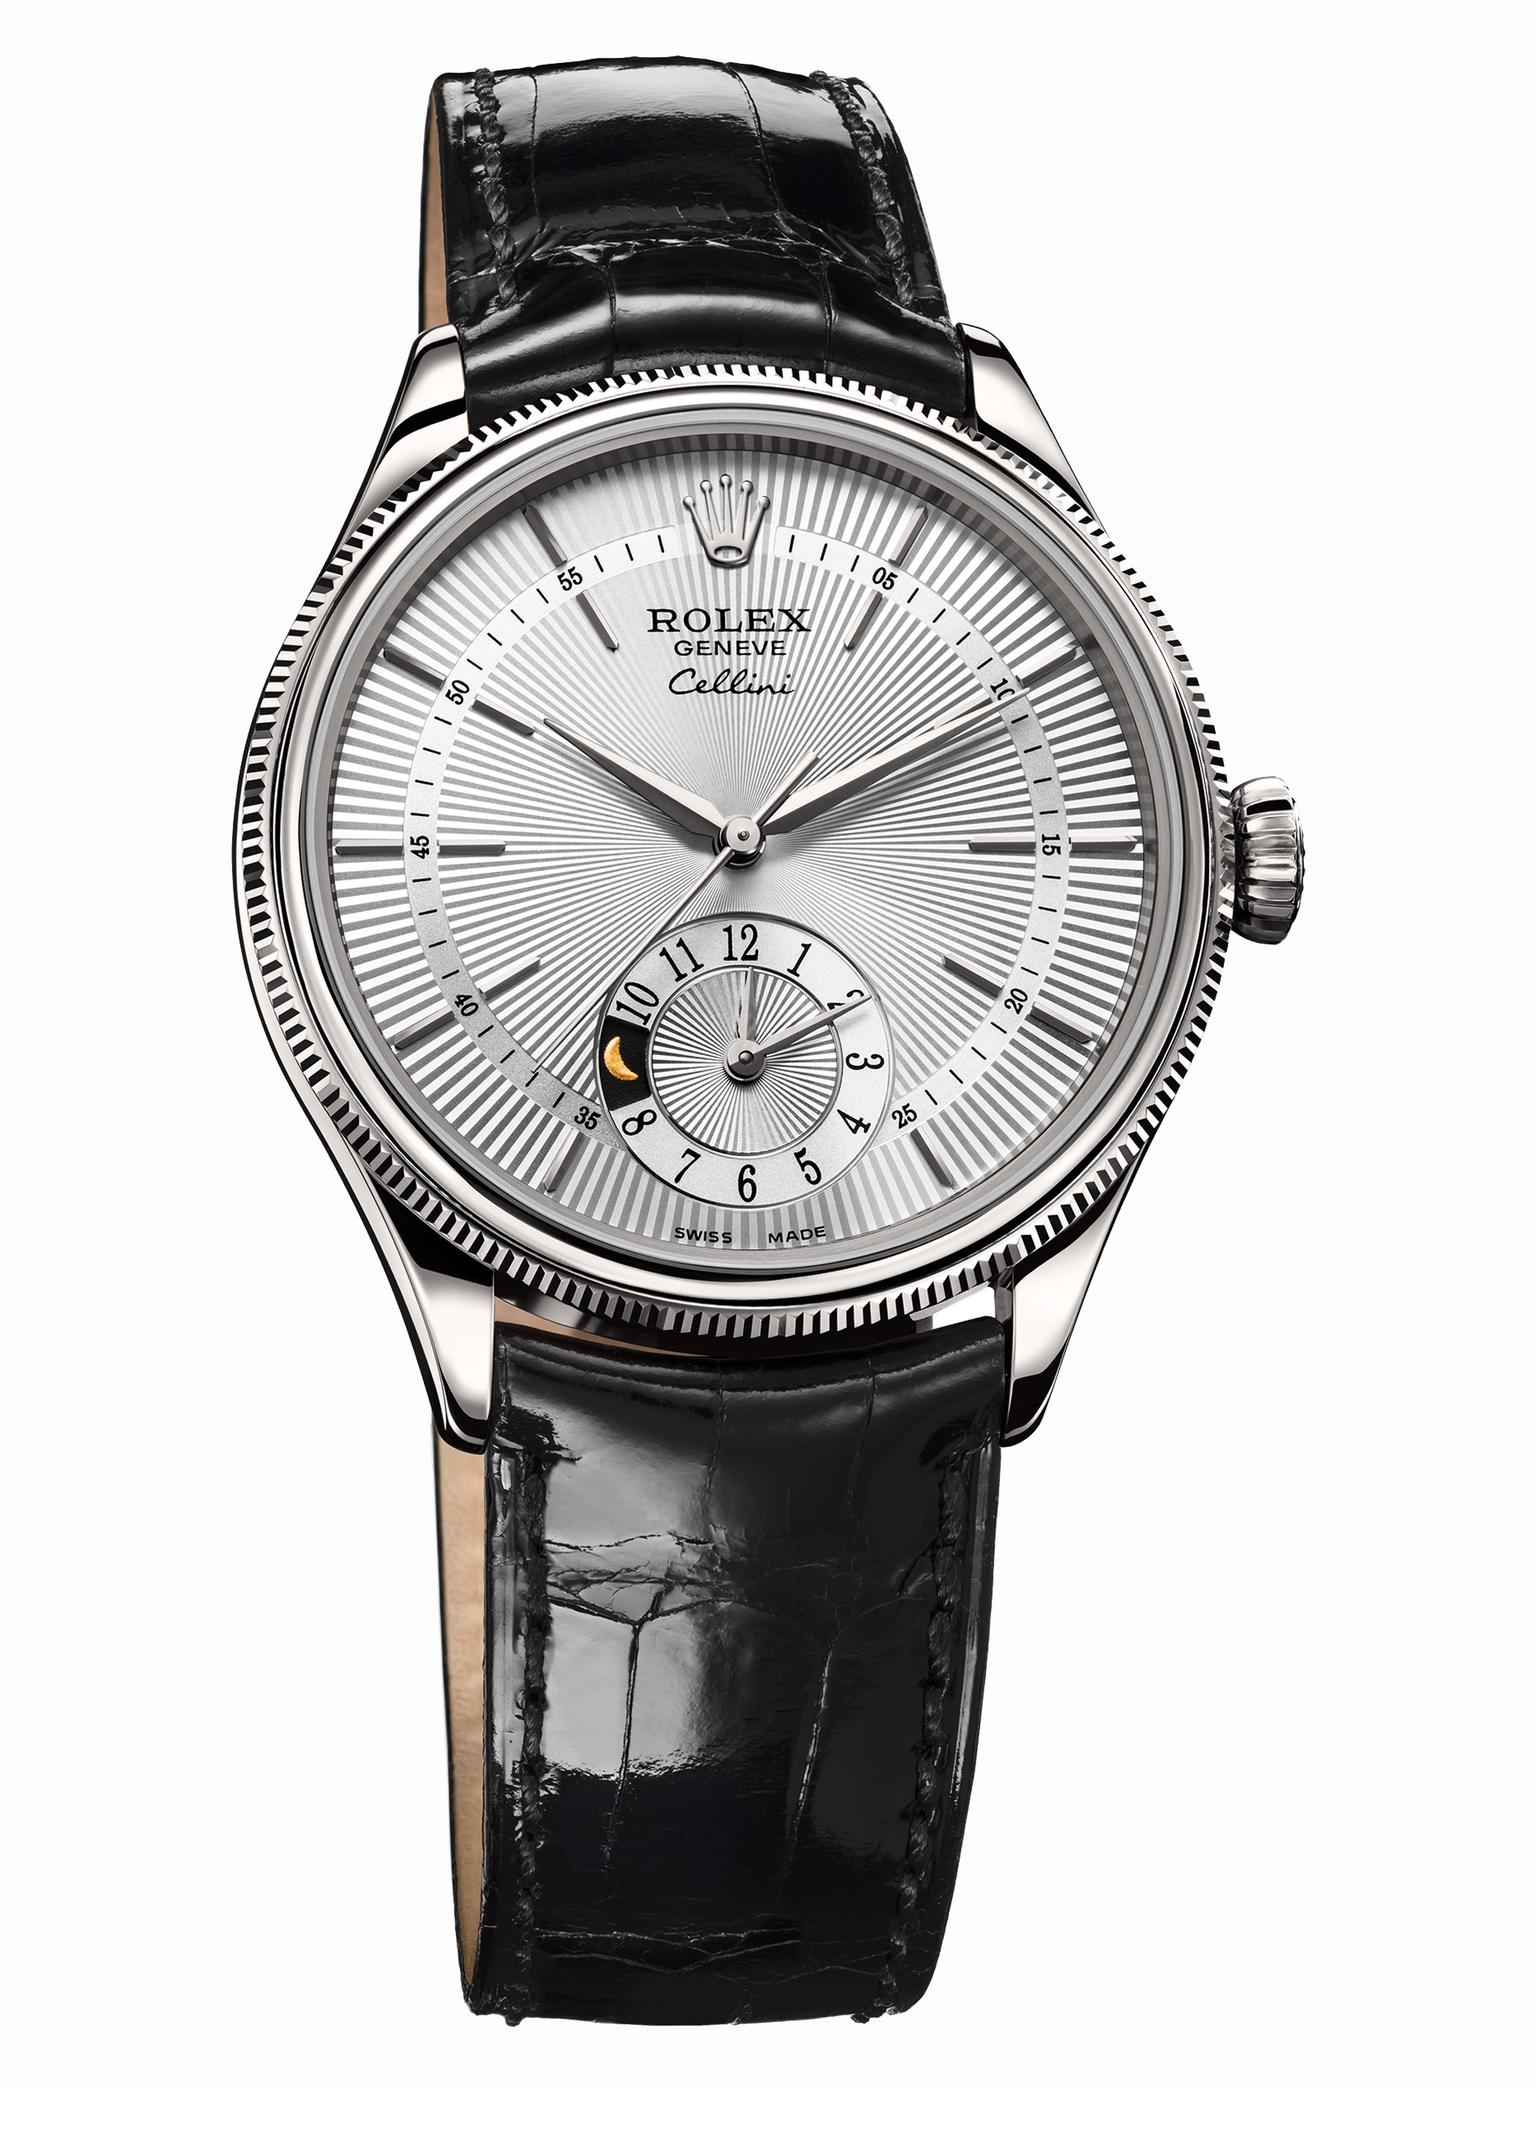 Rolex-Cellini-Dual-Time-with-Silver-guilloche-dial-ref-50525_20140415_Zoom